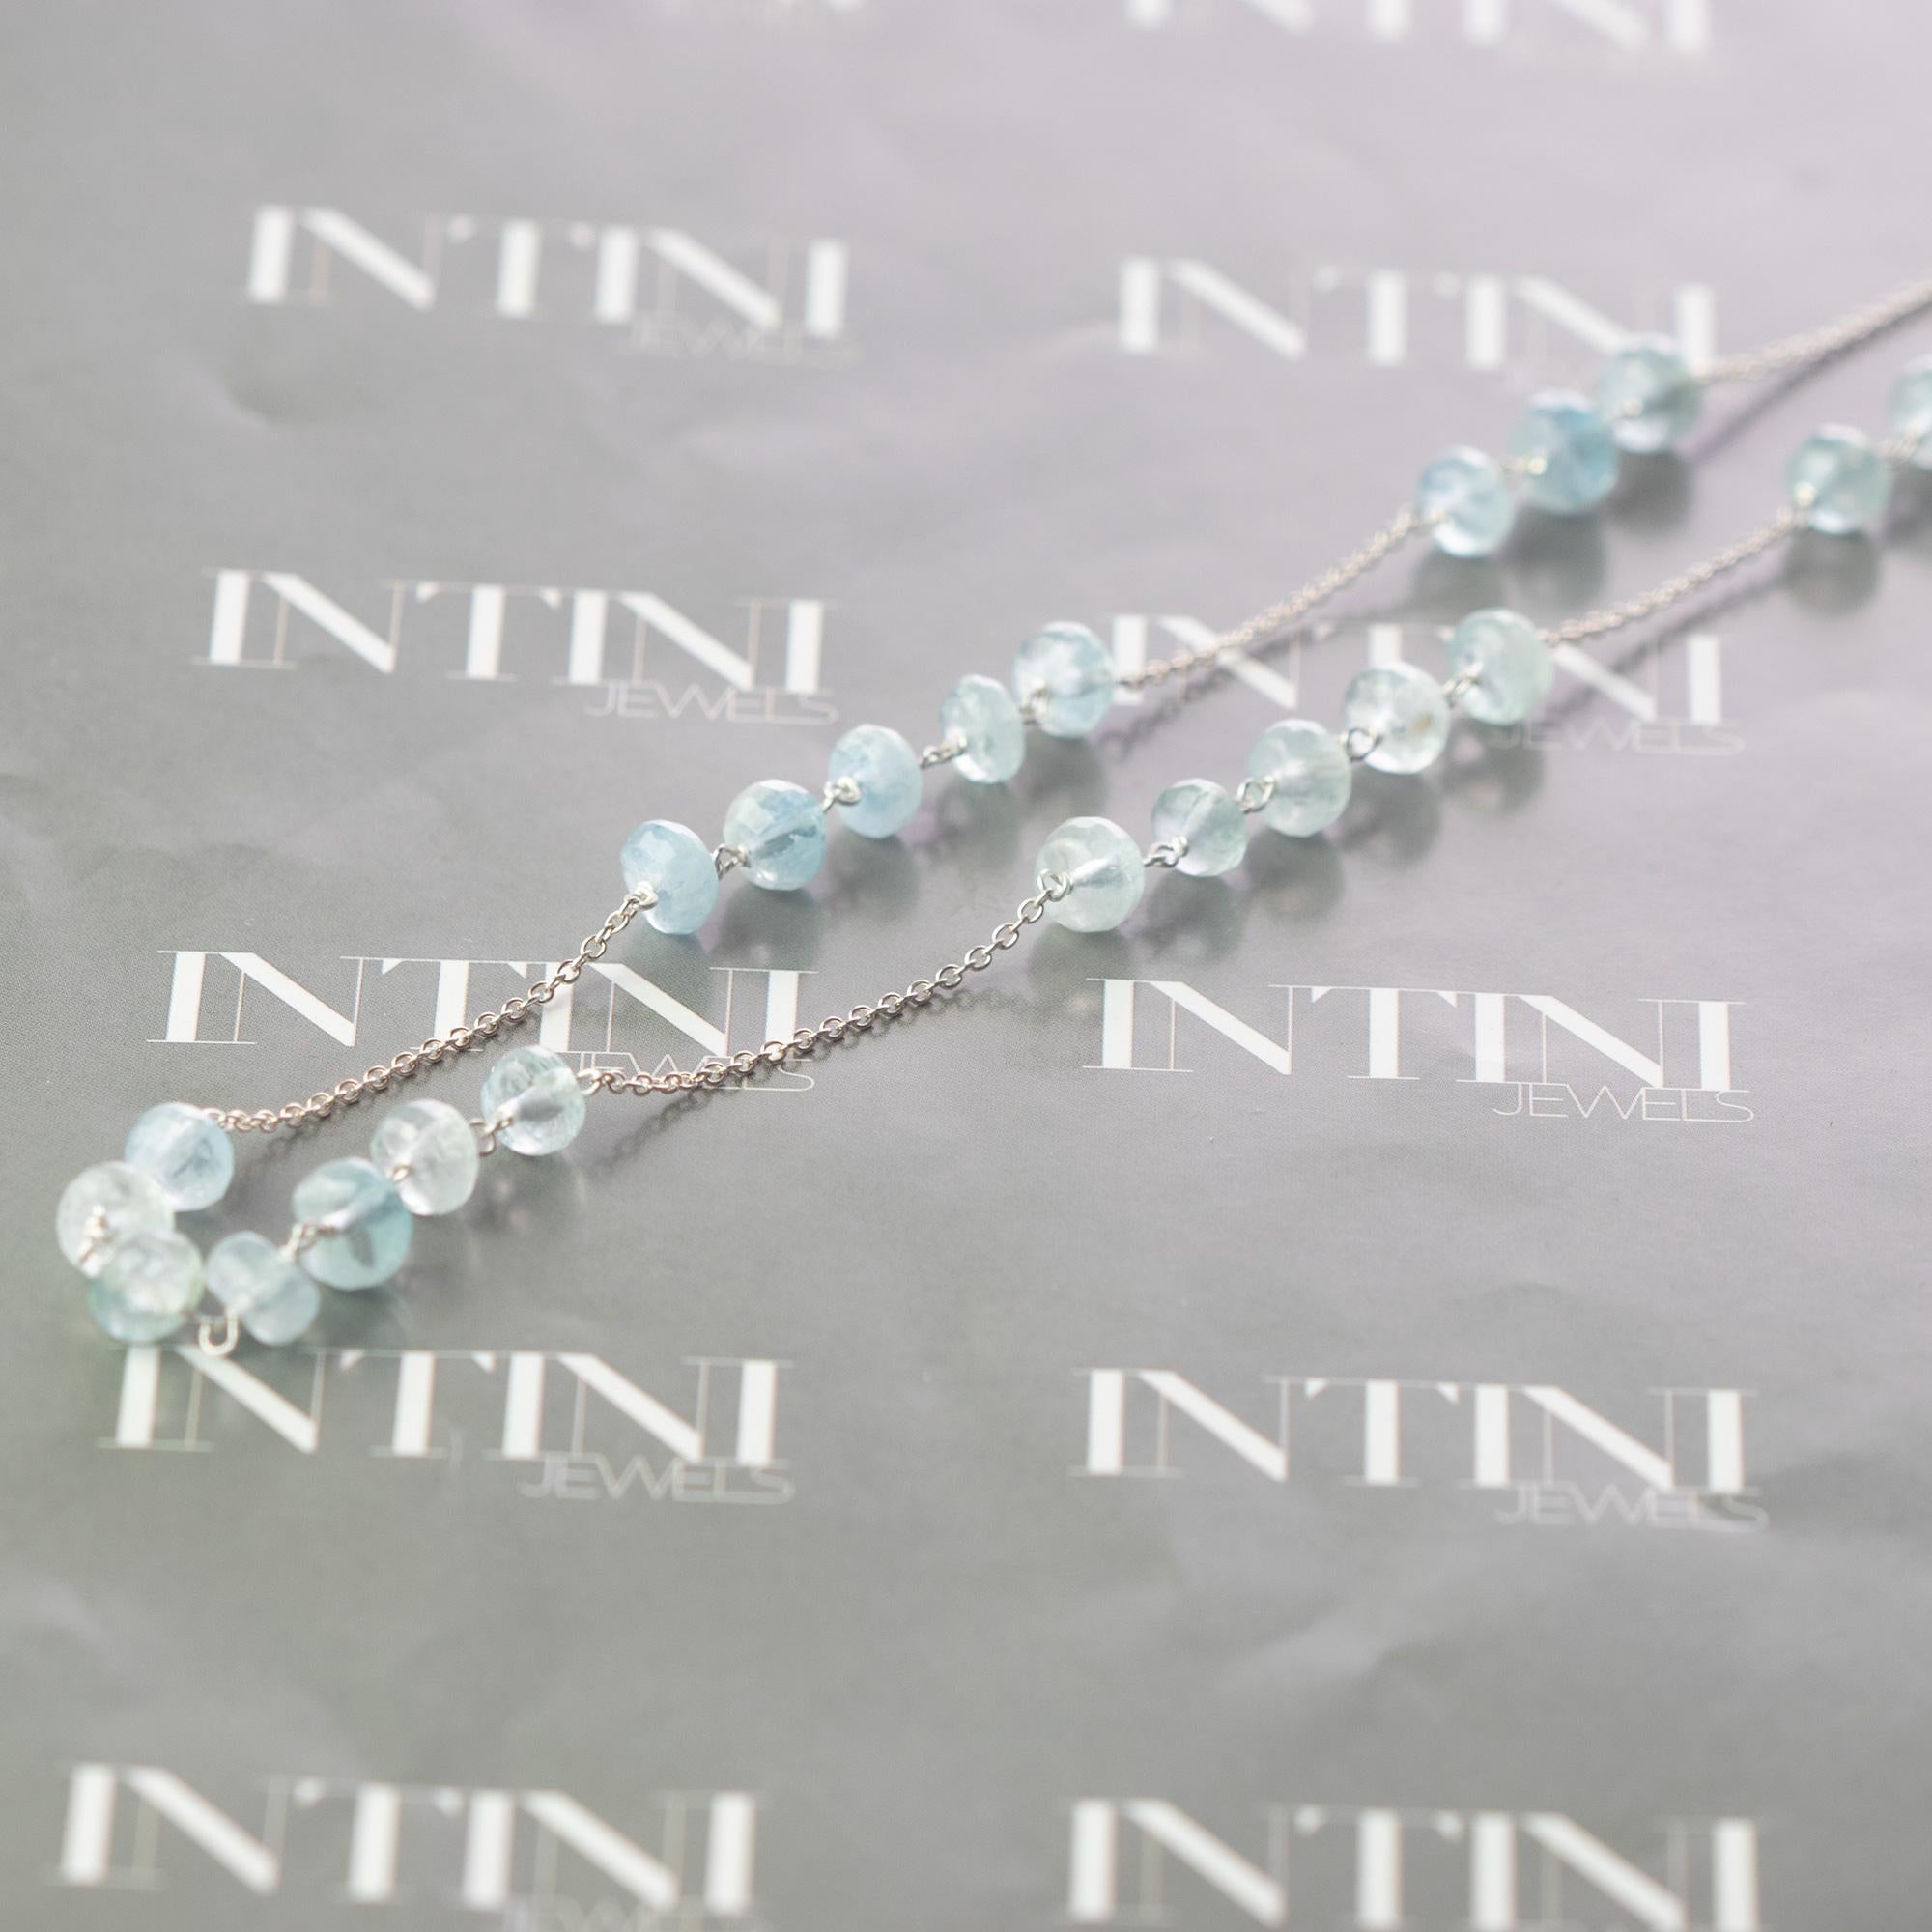 Round Cut Intini Jewels Aquamarine Spheres 18 Karat White Gold Chain Cocktail Necklace For Sale